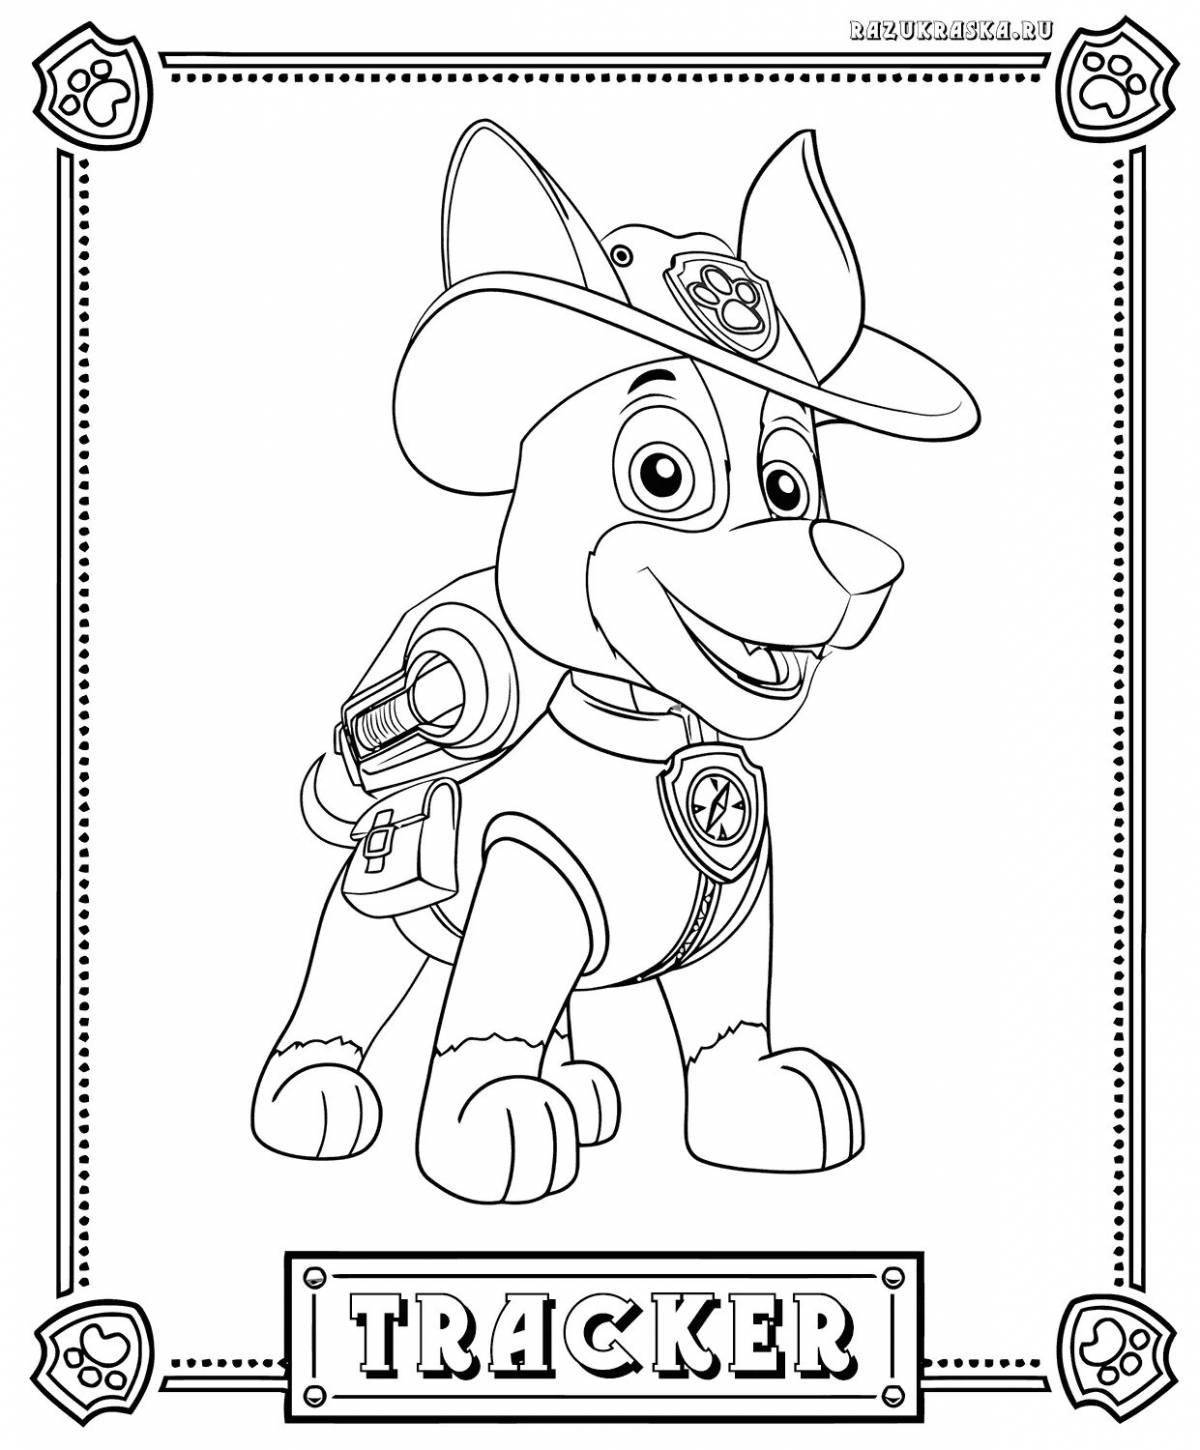 Gorgeous robot dog coloring page